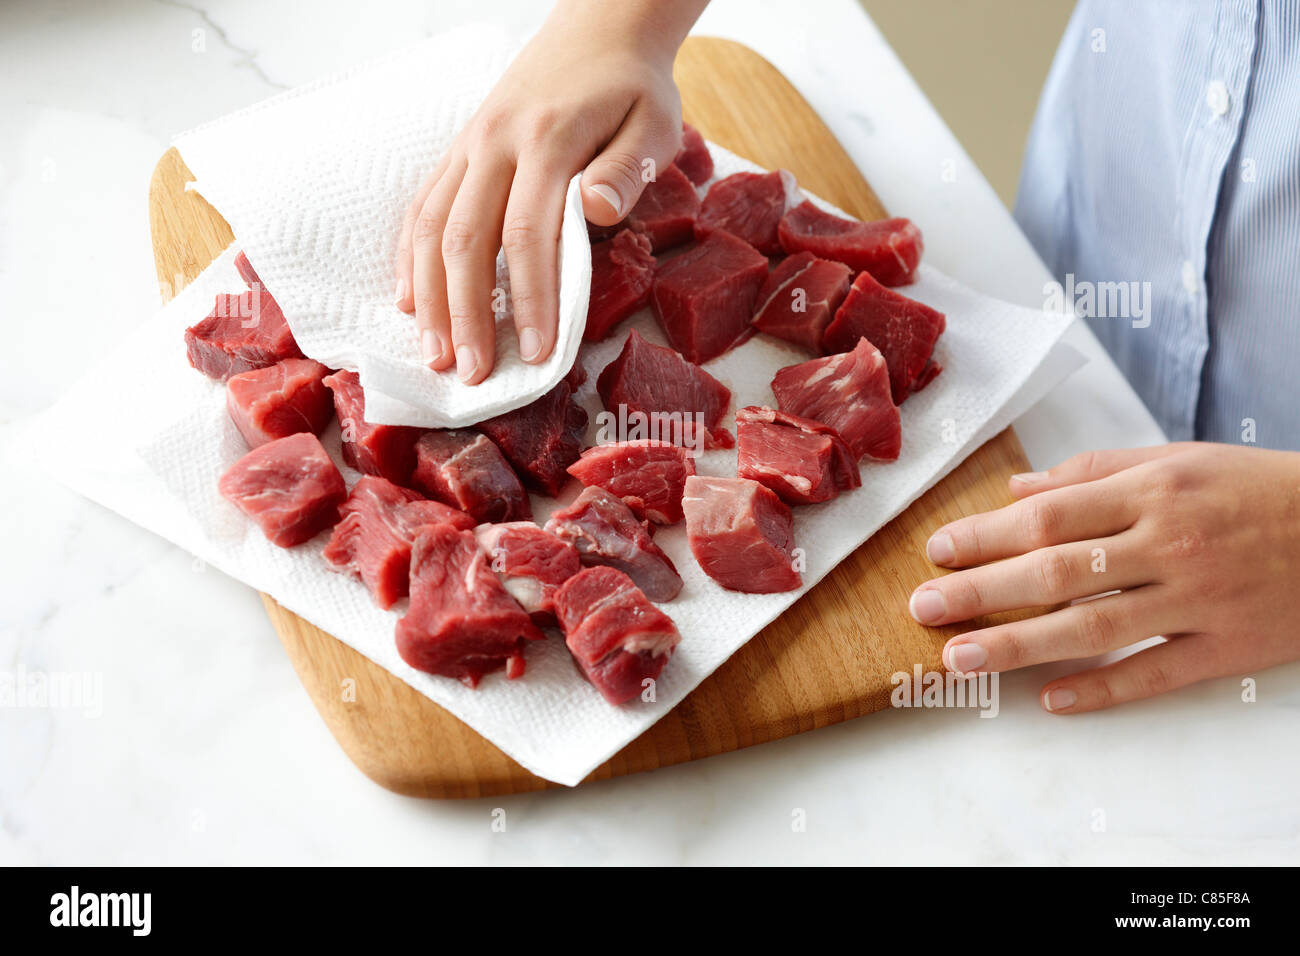 Woman using Paper Towel to dry Beef Cubes Stock Photo